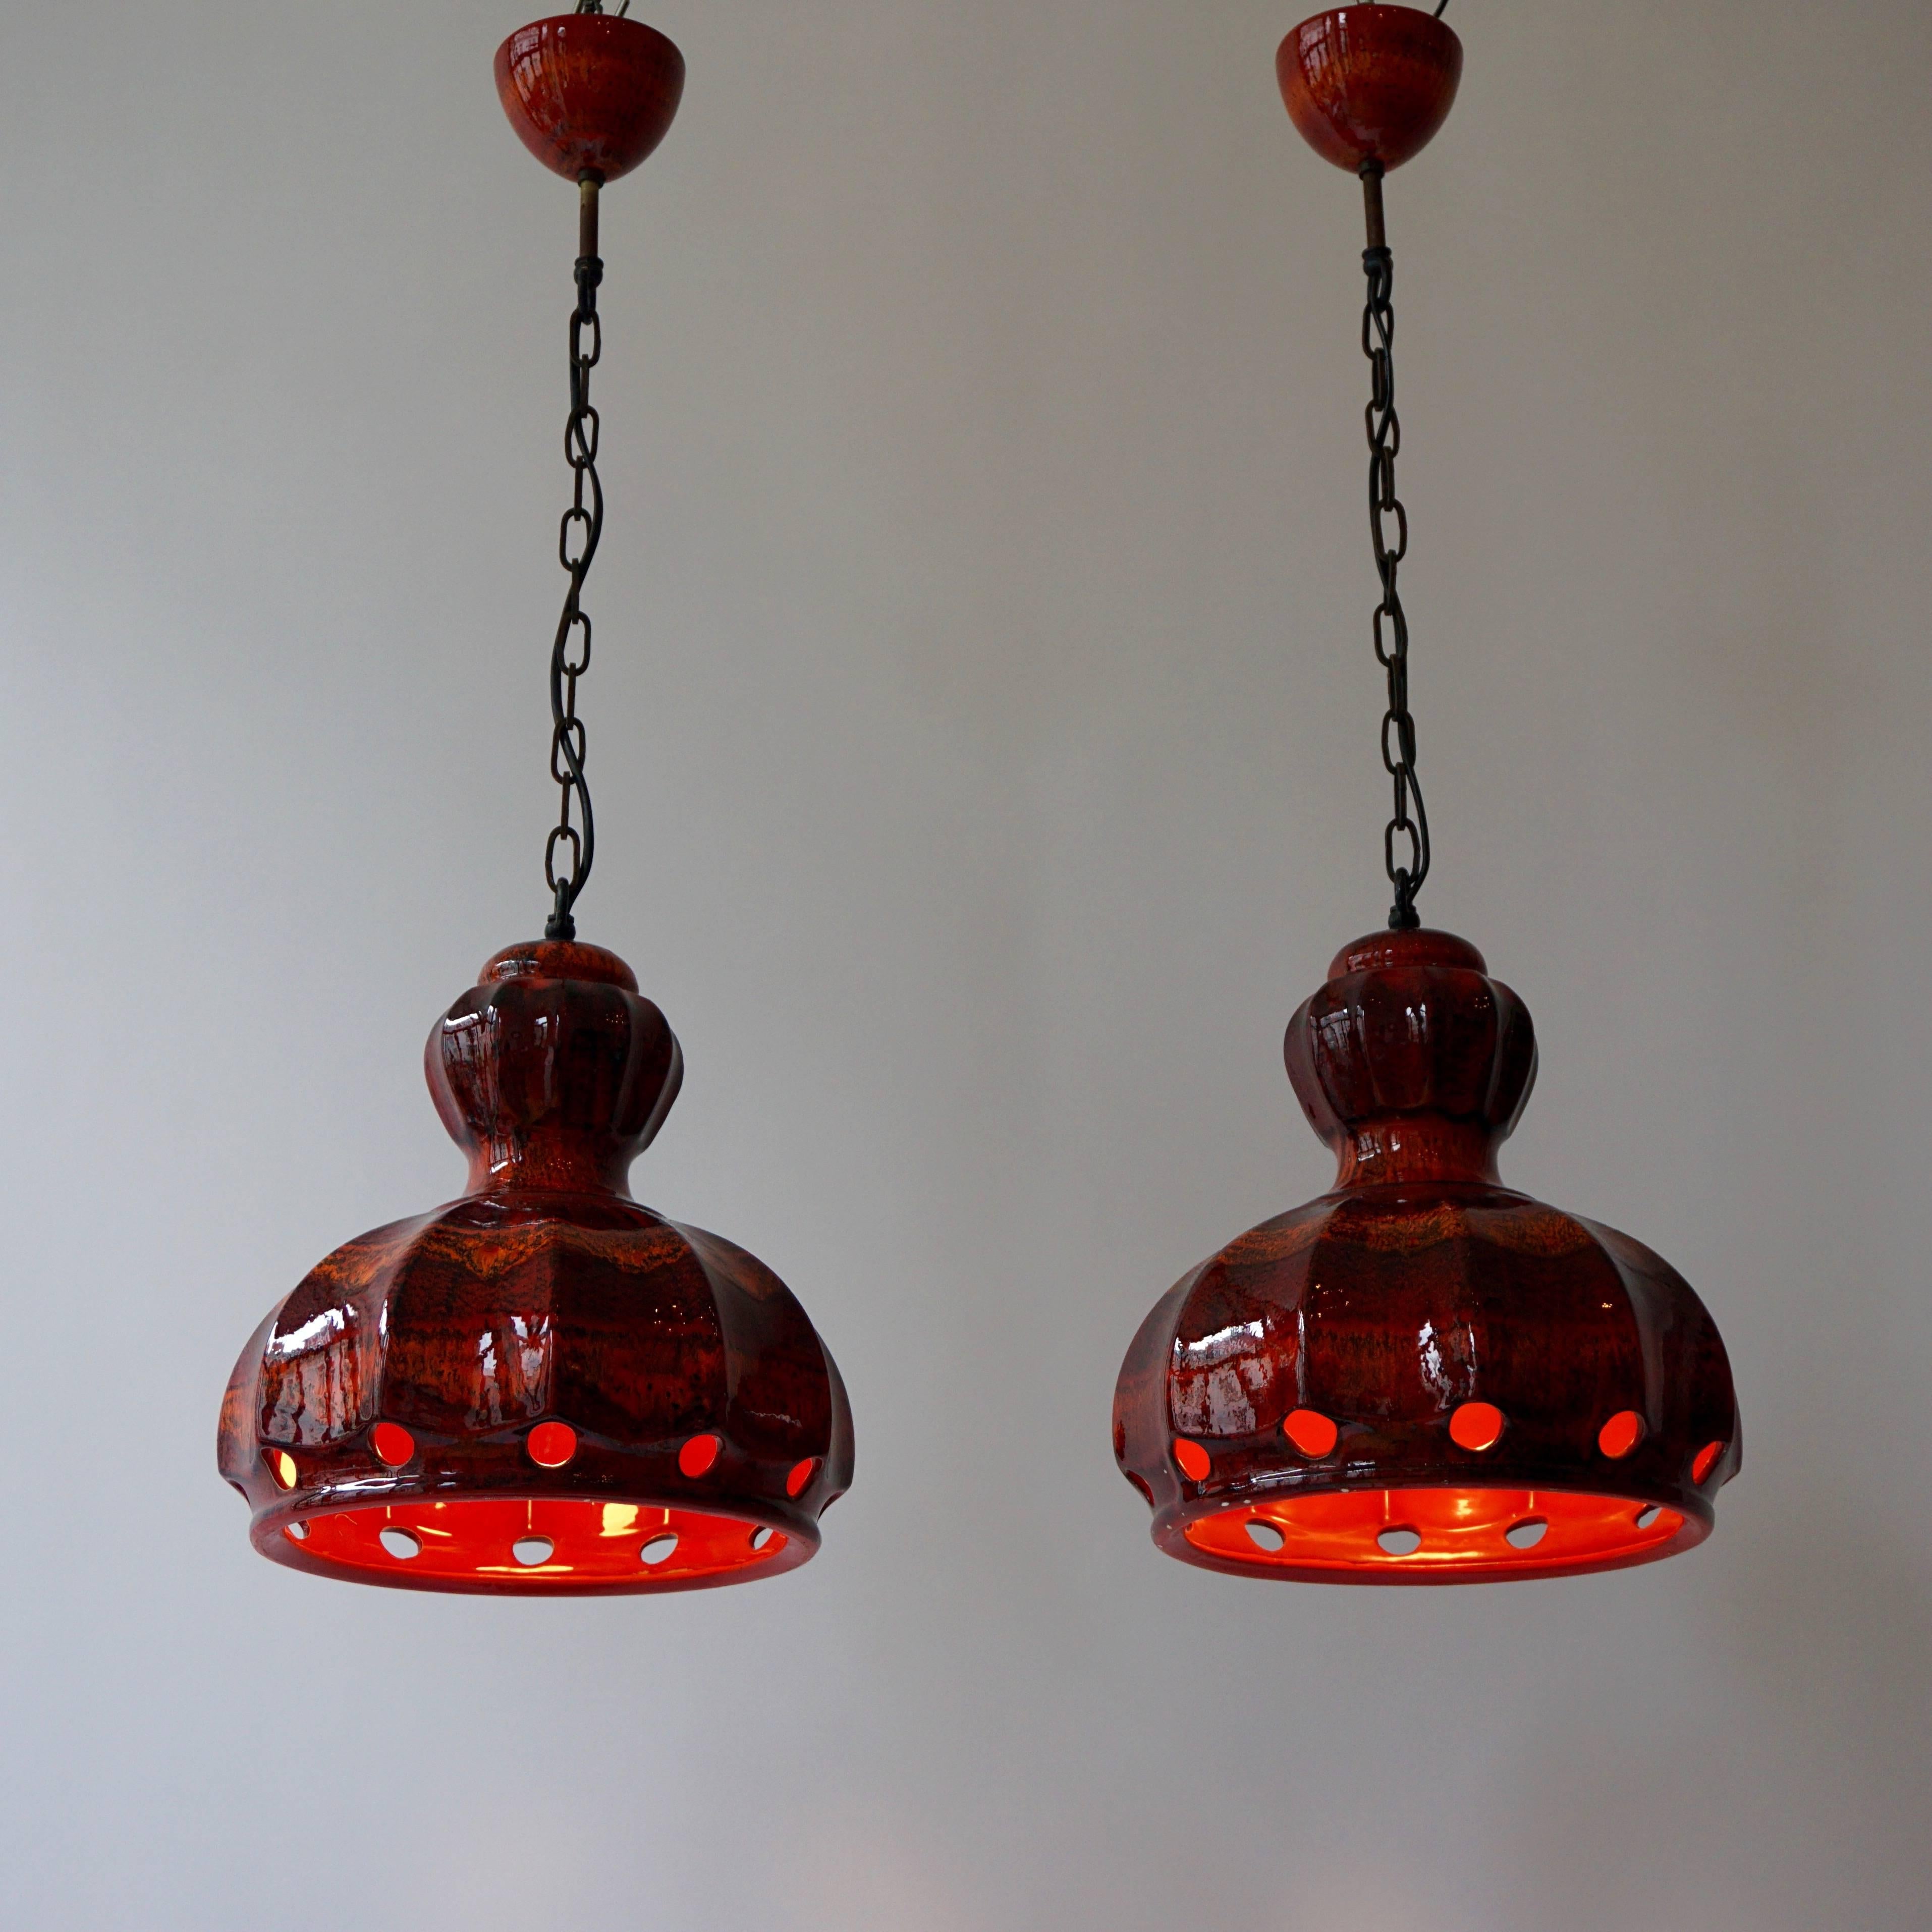 Two ceramic pendant lights.
Total height with chain is 80 cm.